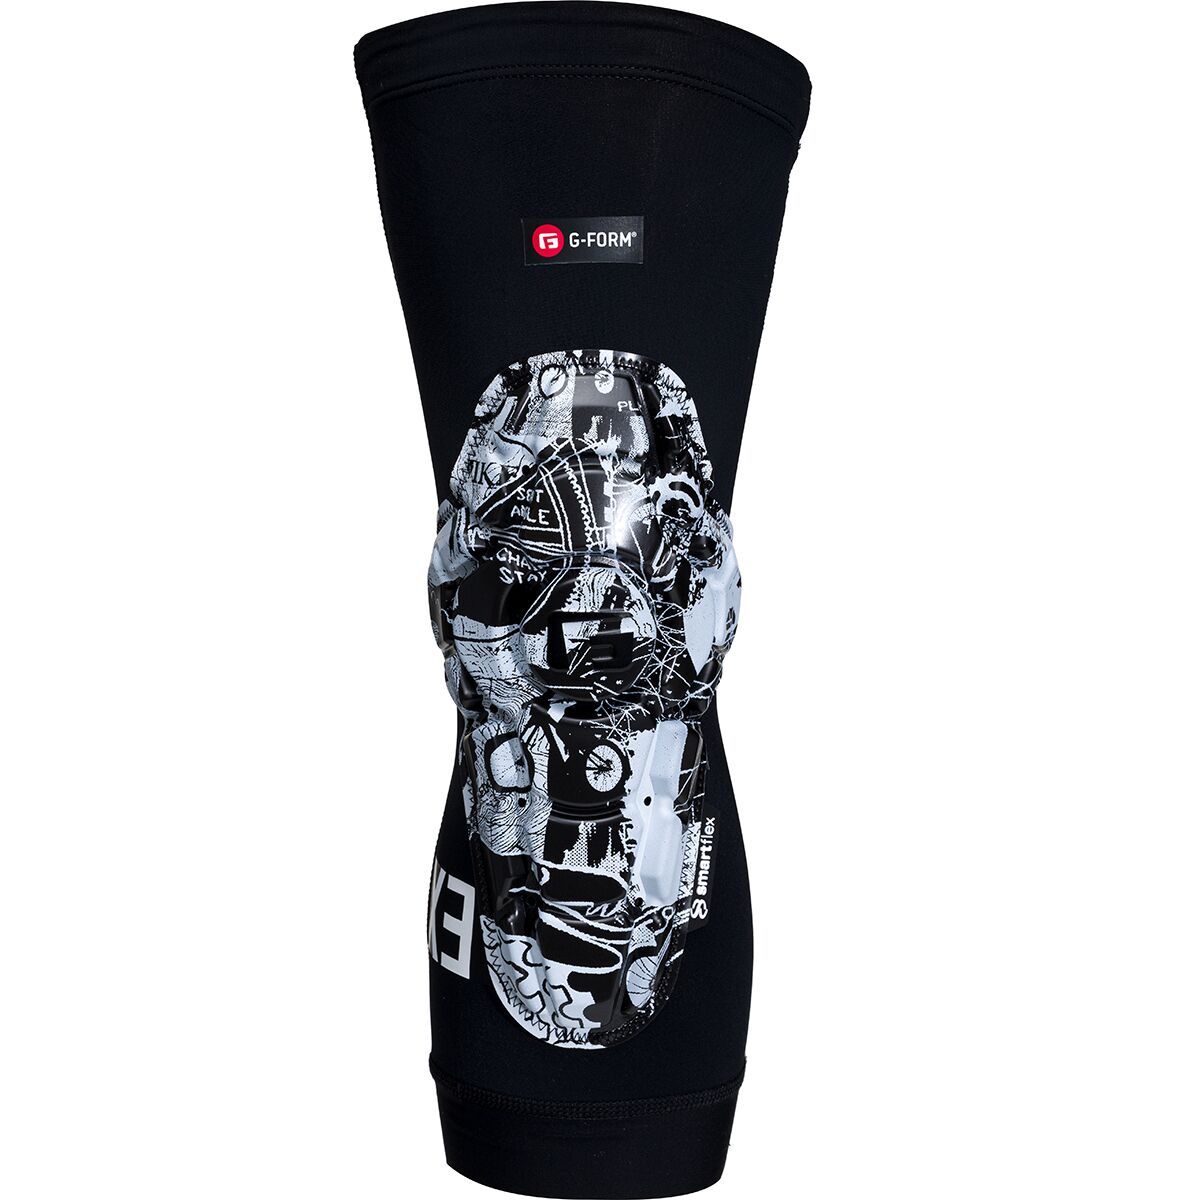 G-Form Pro-X3 Limited Edition Knee Guard 